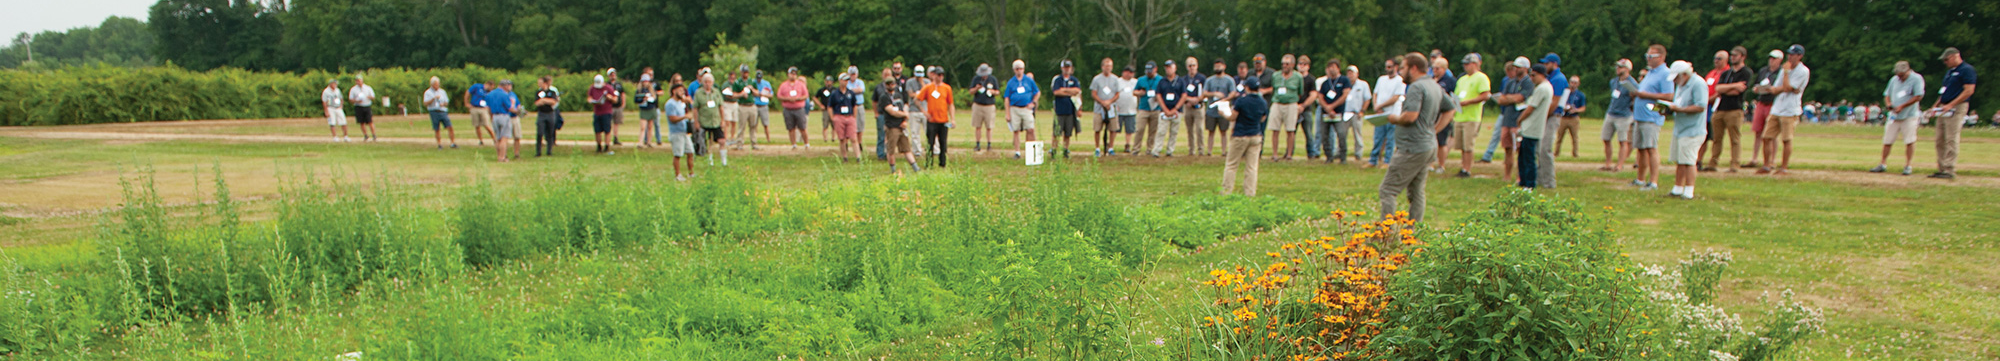 Turf training attendees in a field with flowers in the foreground